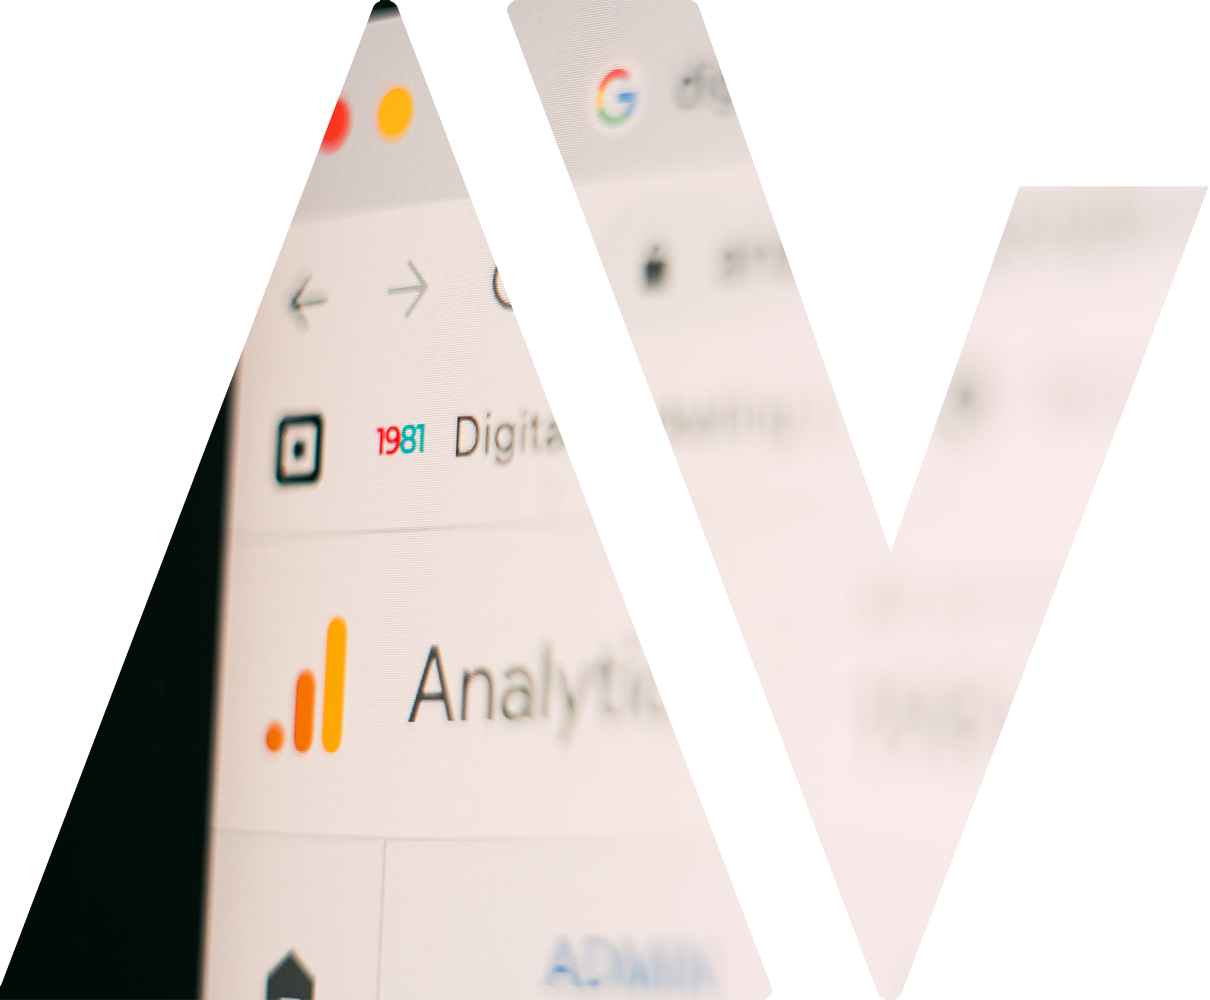 Appverx logo with analytics on Monitor in background